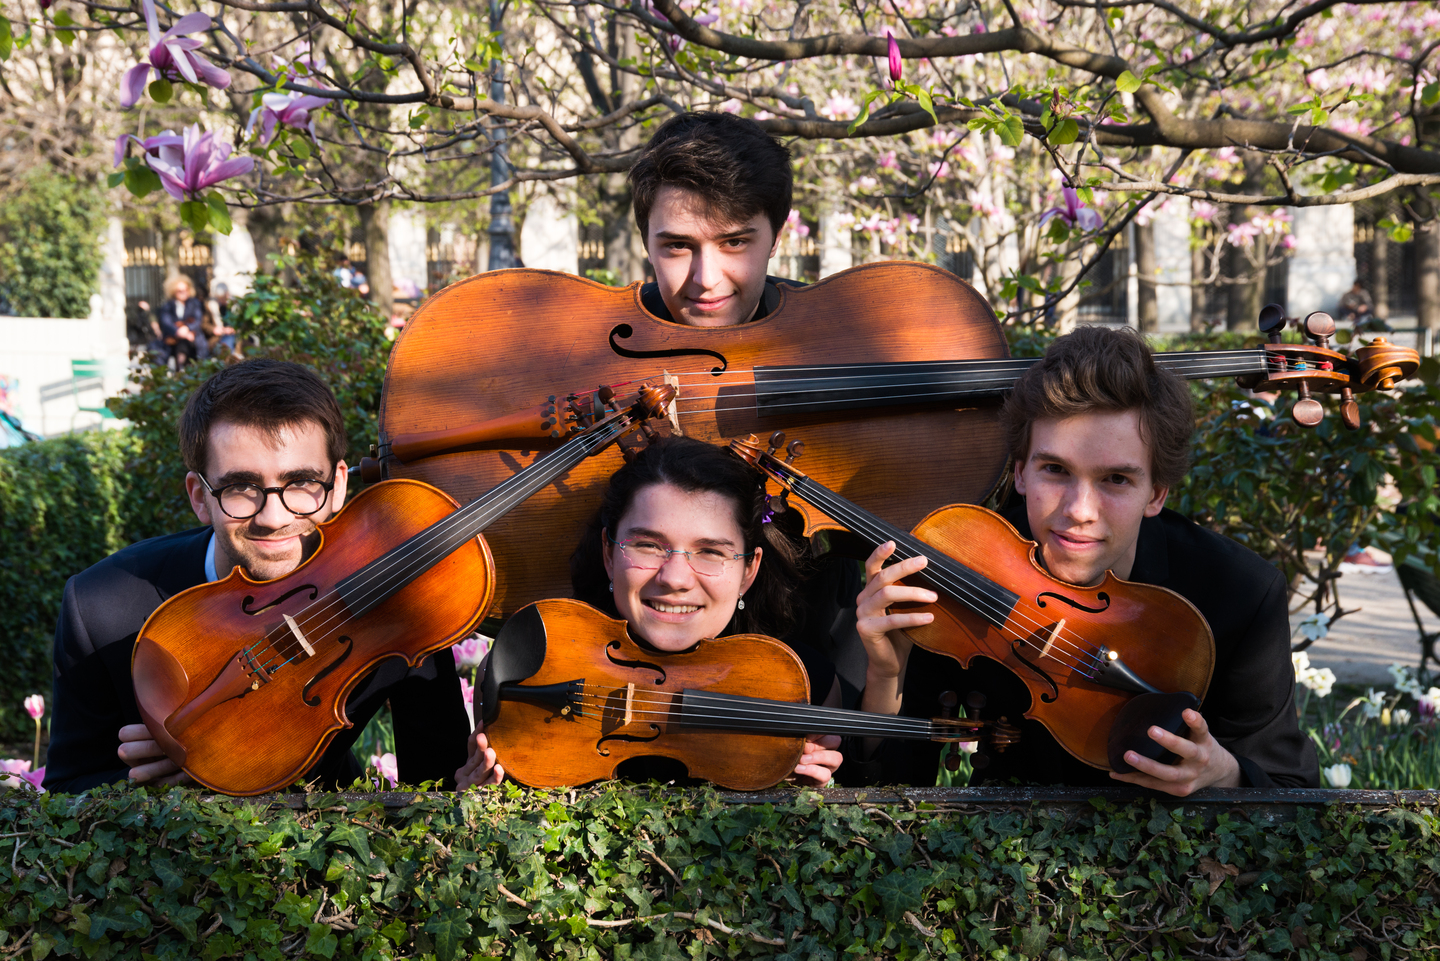 The quartet is mischievously spying on you, hidden behind their instruments and nestled against a bush